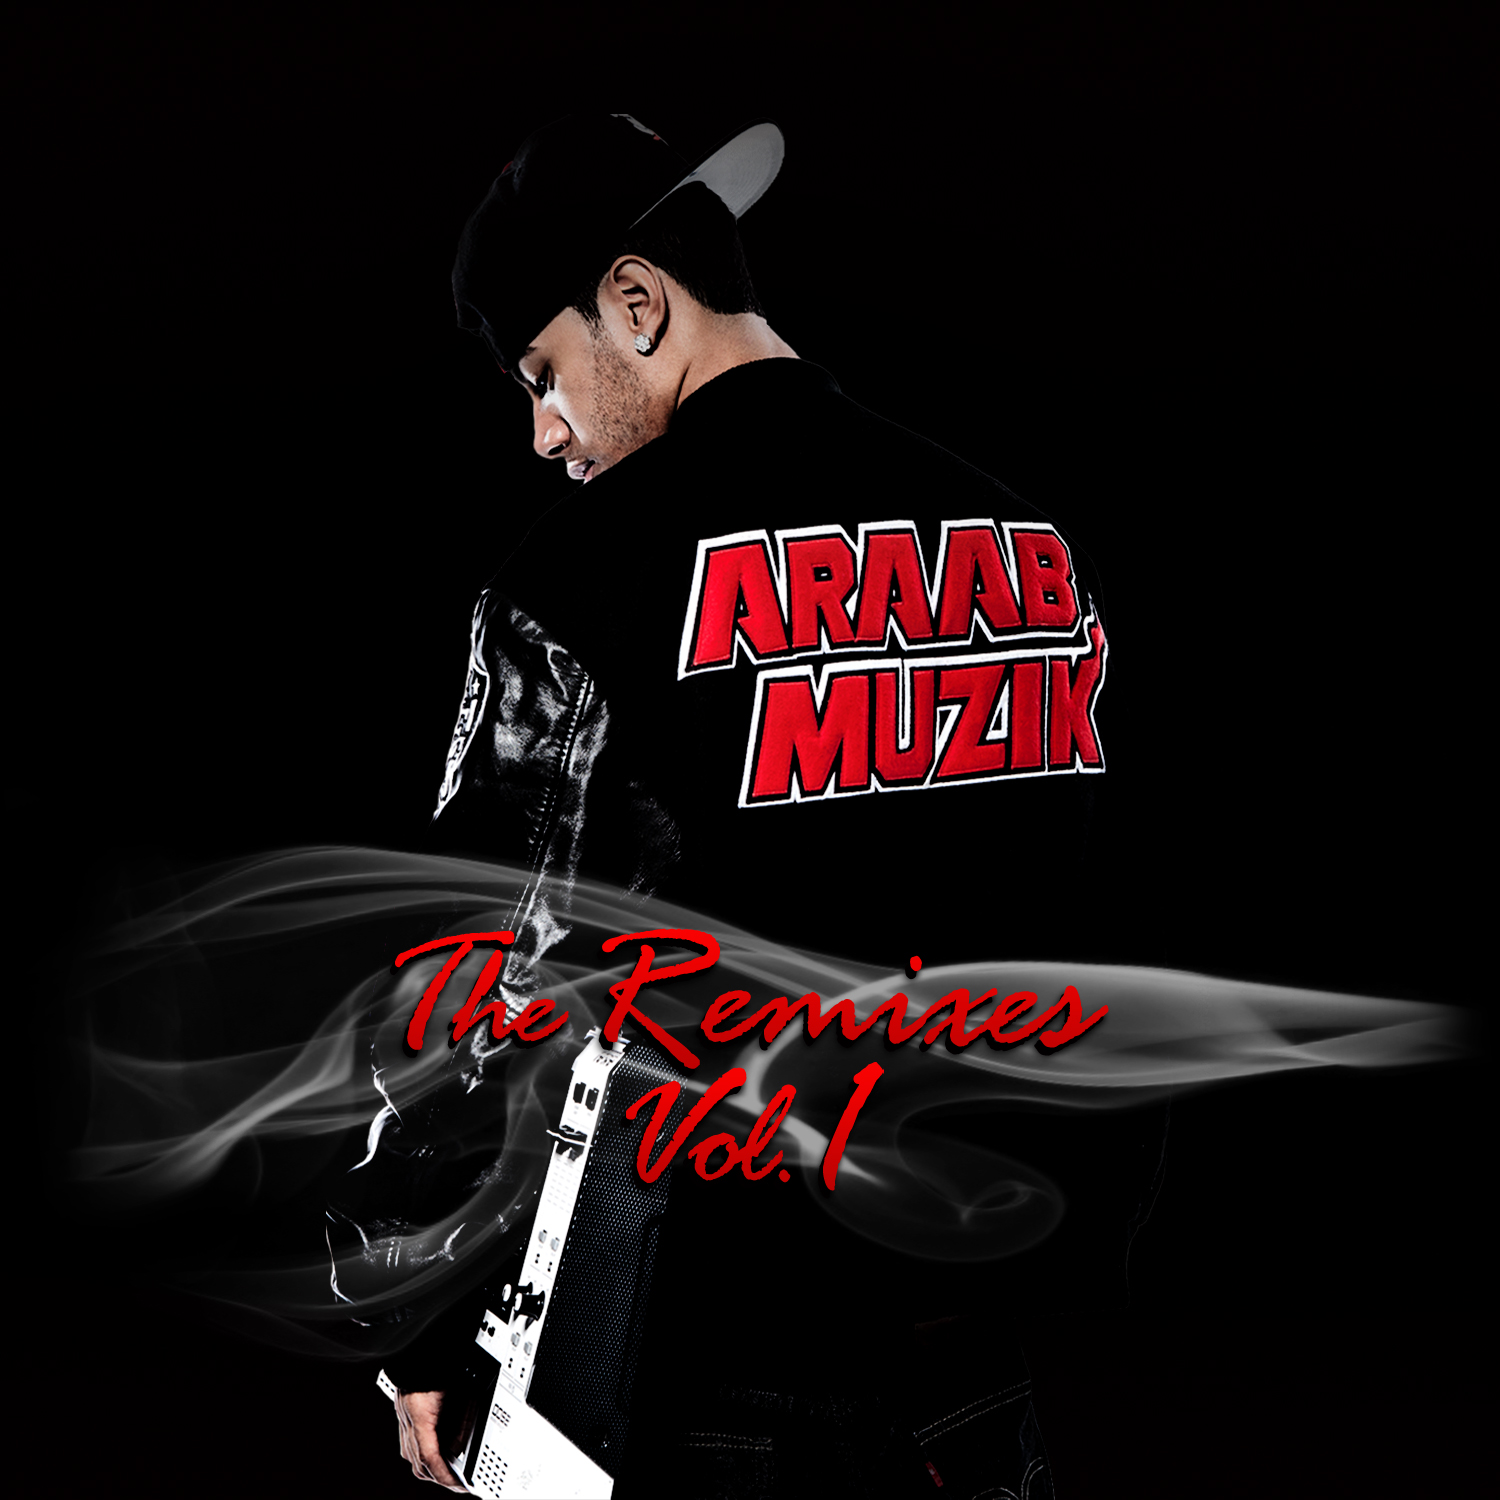 News Added Jun 26, 2013 AraabMUZIK will release The Remixes, Vol. 1. via Ultra Records on July 9. Along with remixes of the Ultra roster, it will feature two originals. Earlier this year, he released the For Professional Use Only mixtape. Submitted By selym Track list: Added Jun 26, 2013 No Official Tracklist announced. Submitted […]